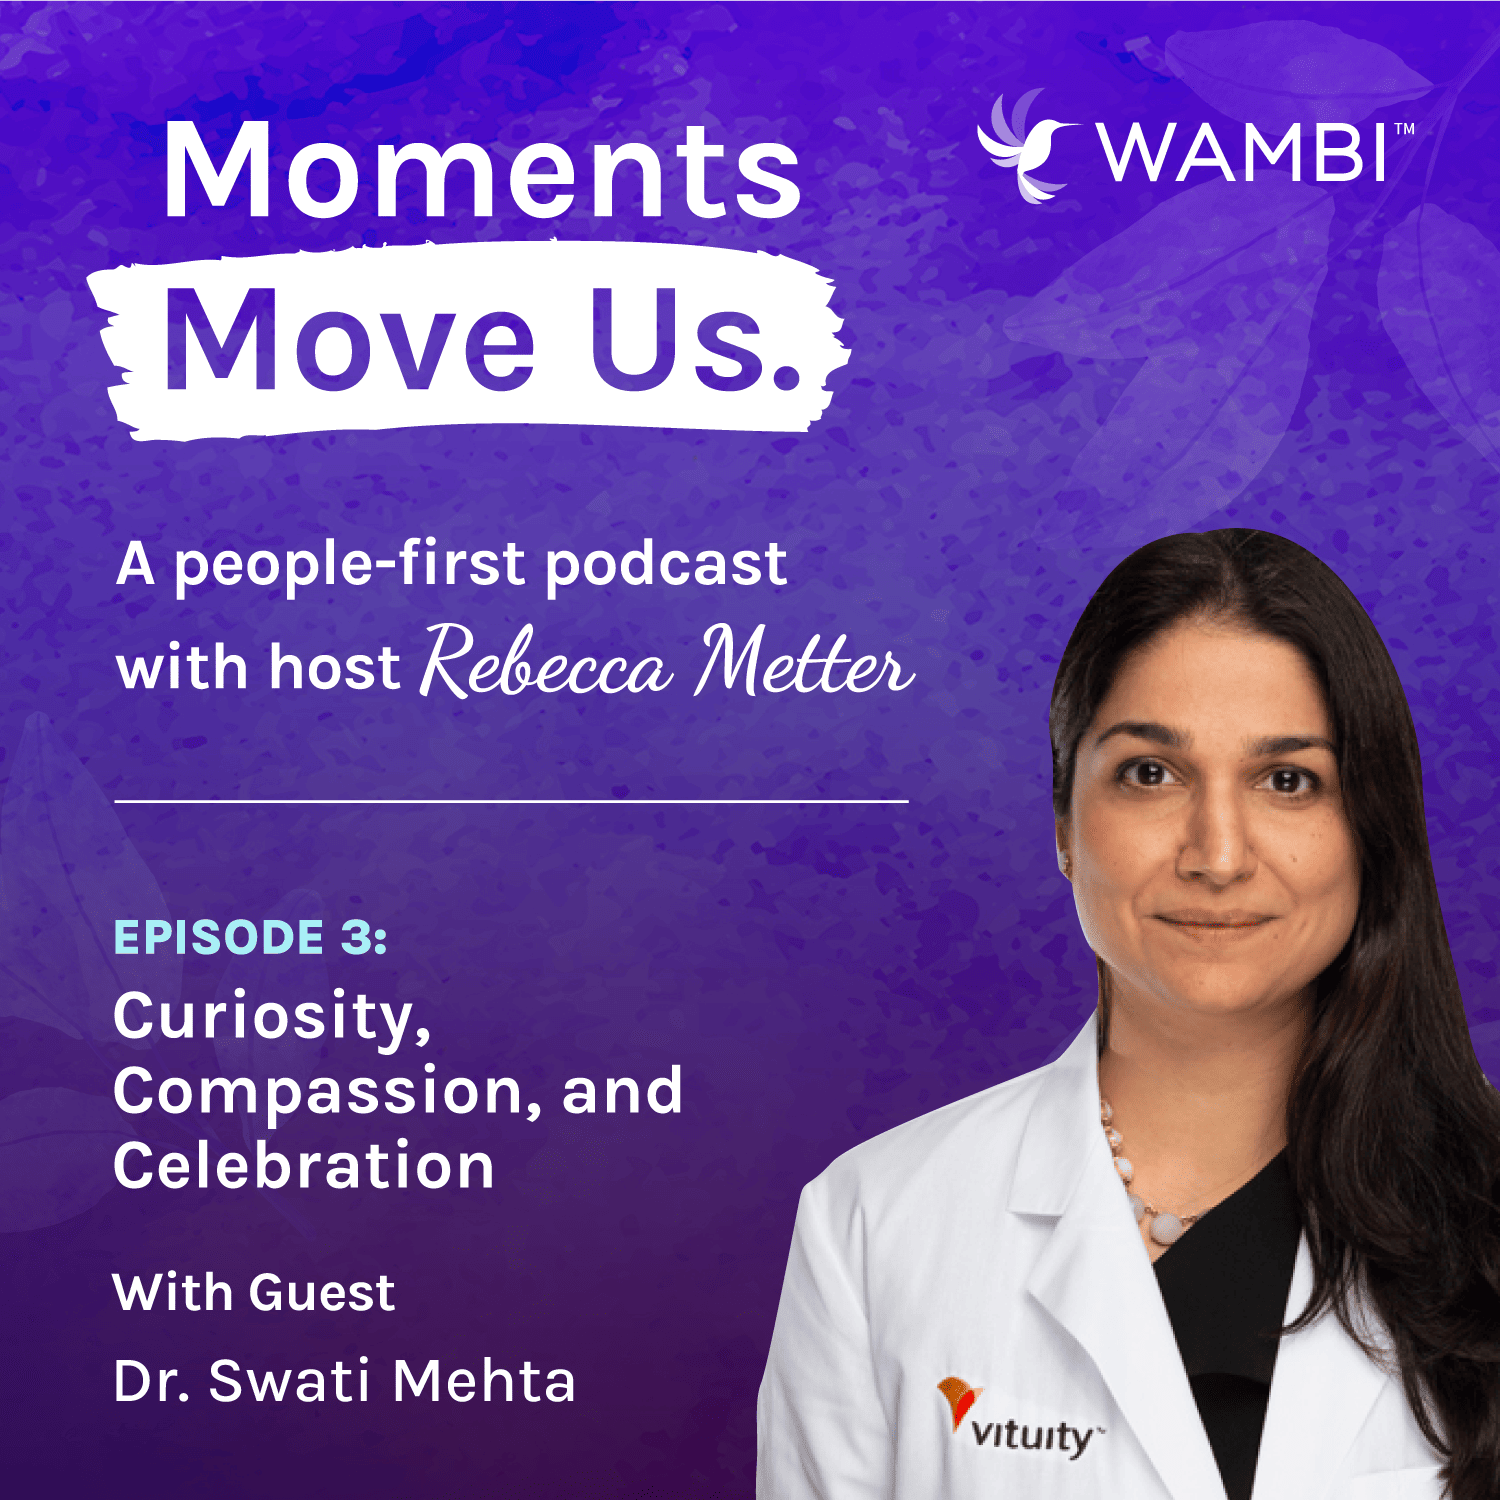 Moments Move Us Podcast with Dr. Swati Mehta from Vituity